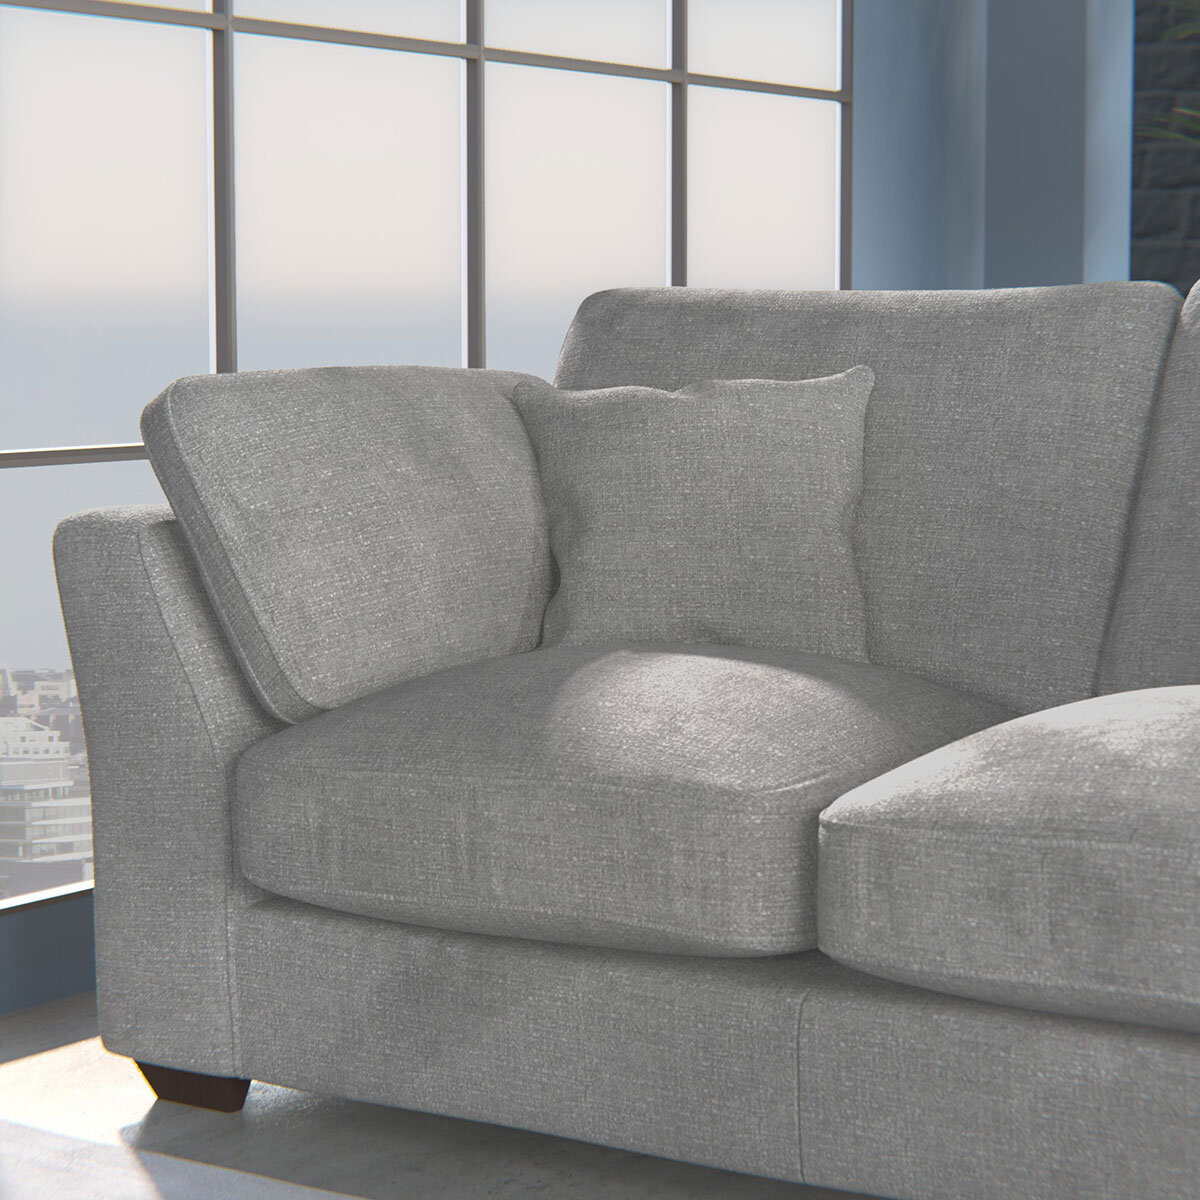 Selsey Grey Fabric 3 Seater Sofa